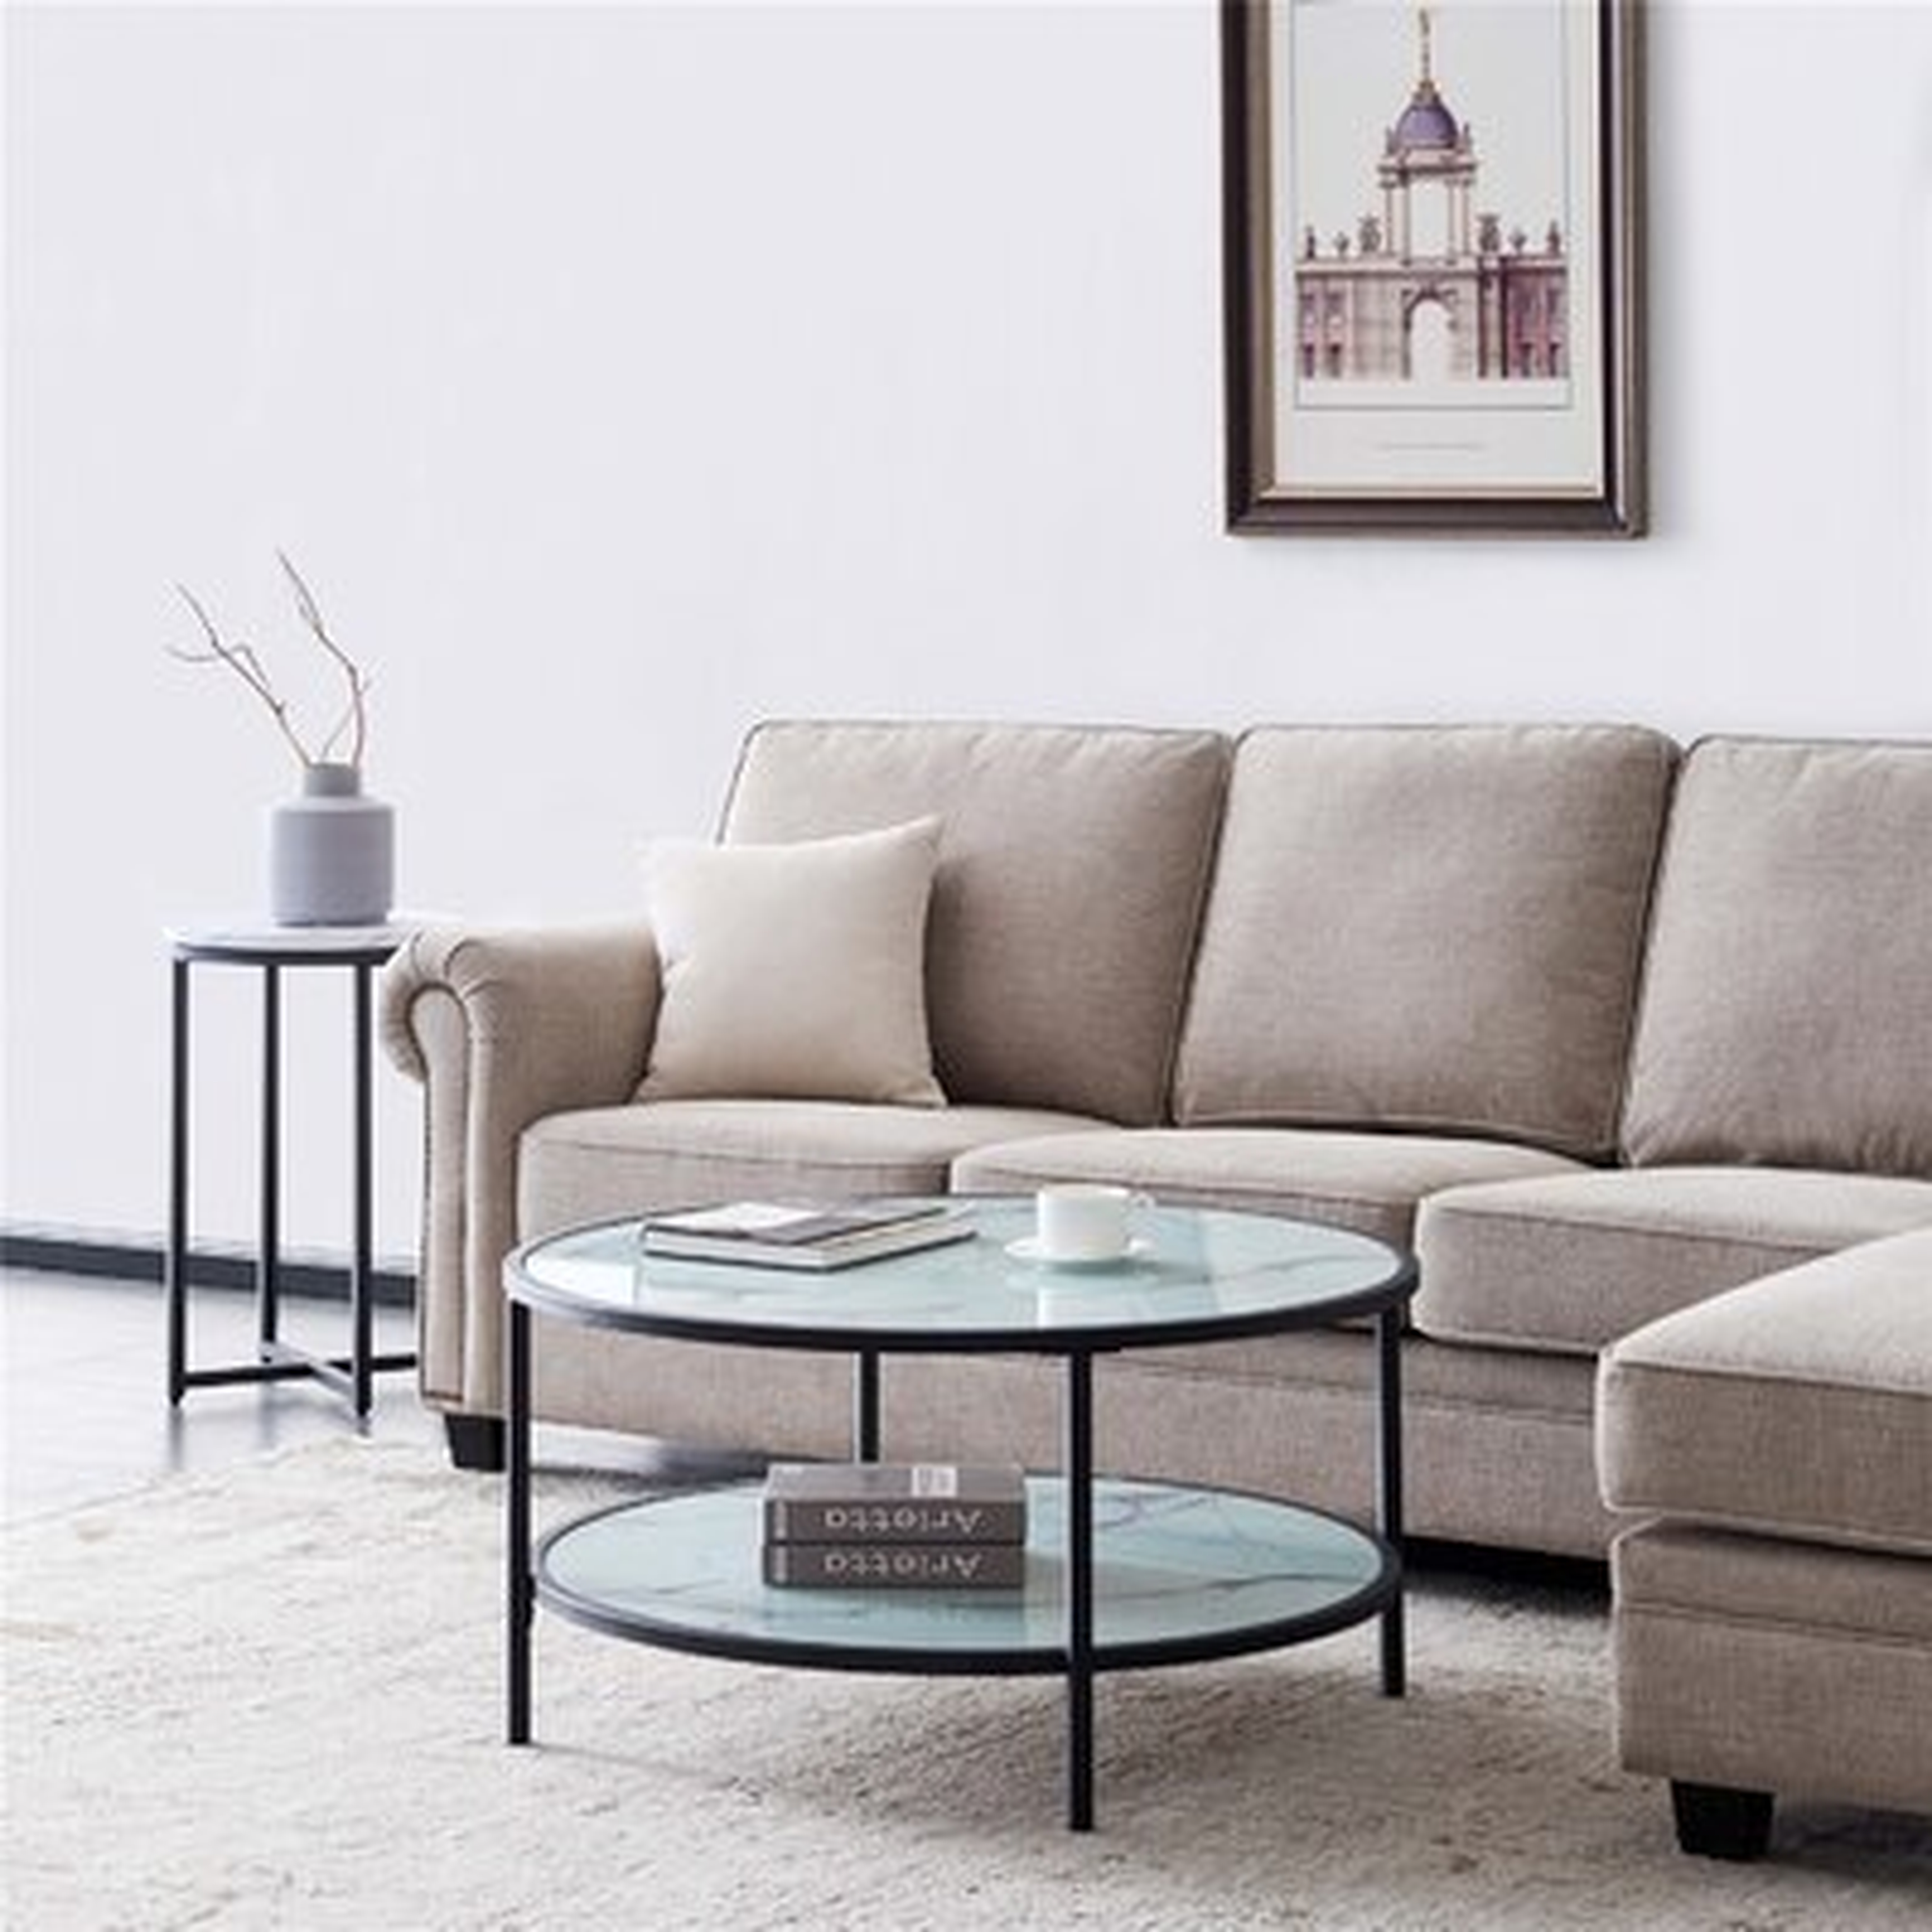 Coffee Table With Large Storage Space, Marble - Wayfair